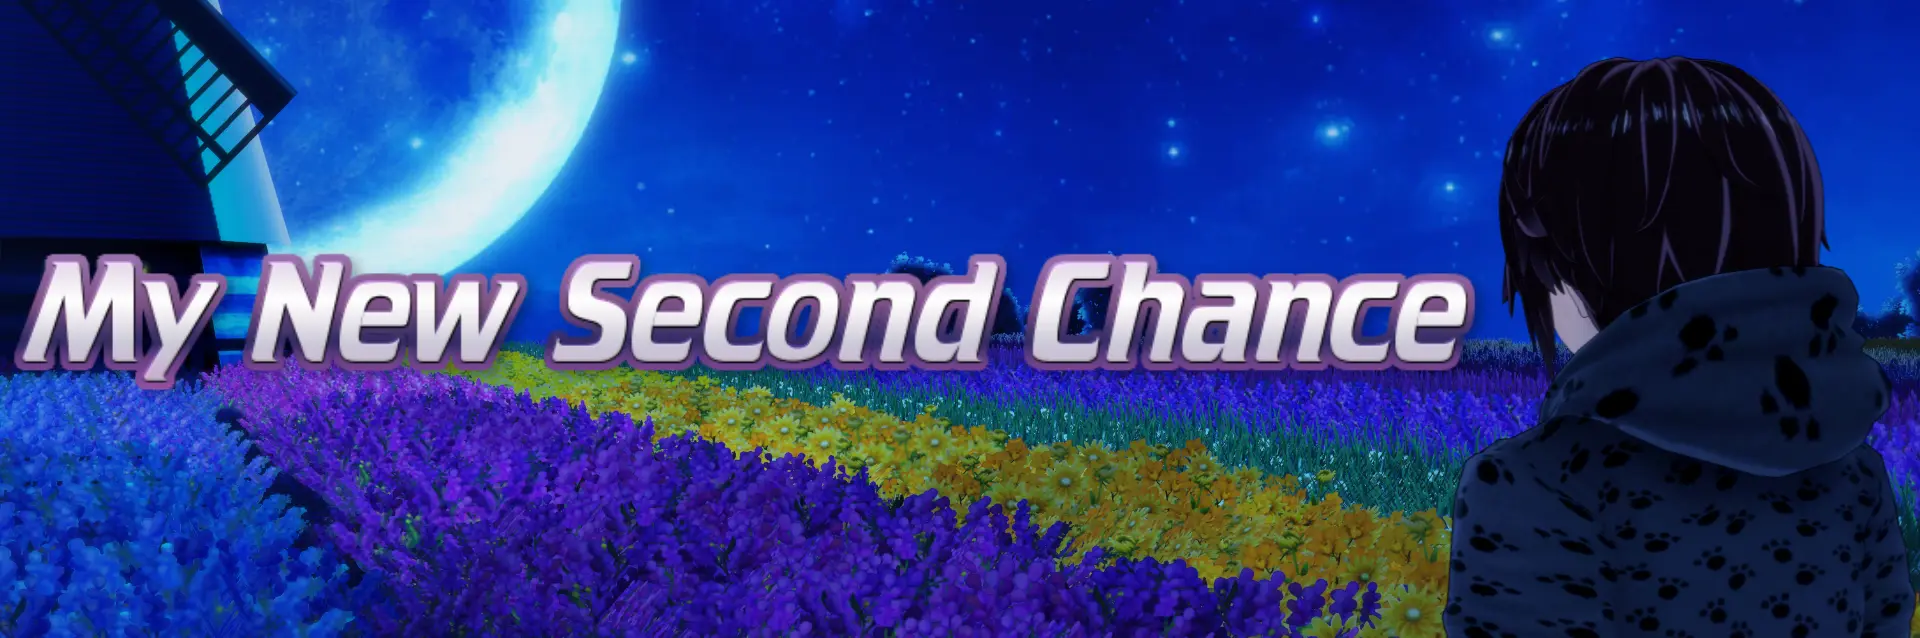 My New Second Chance main image